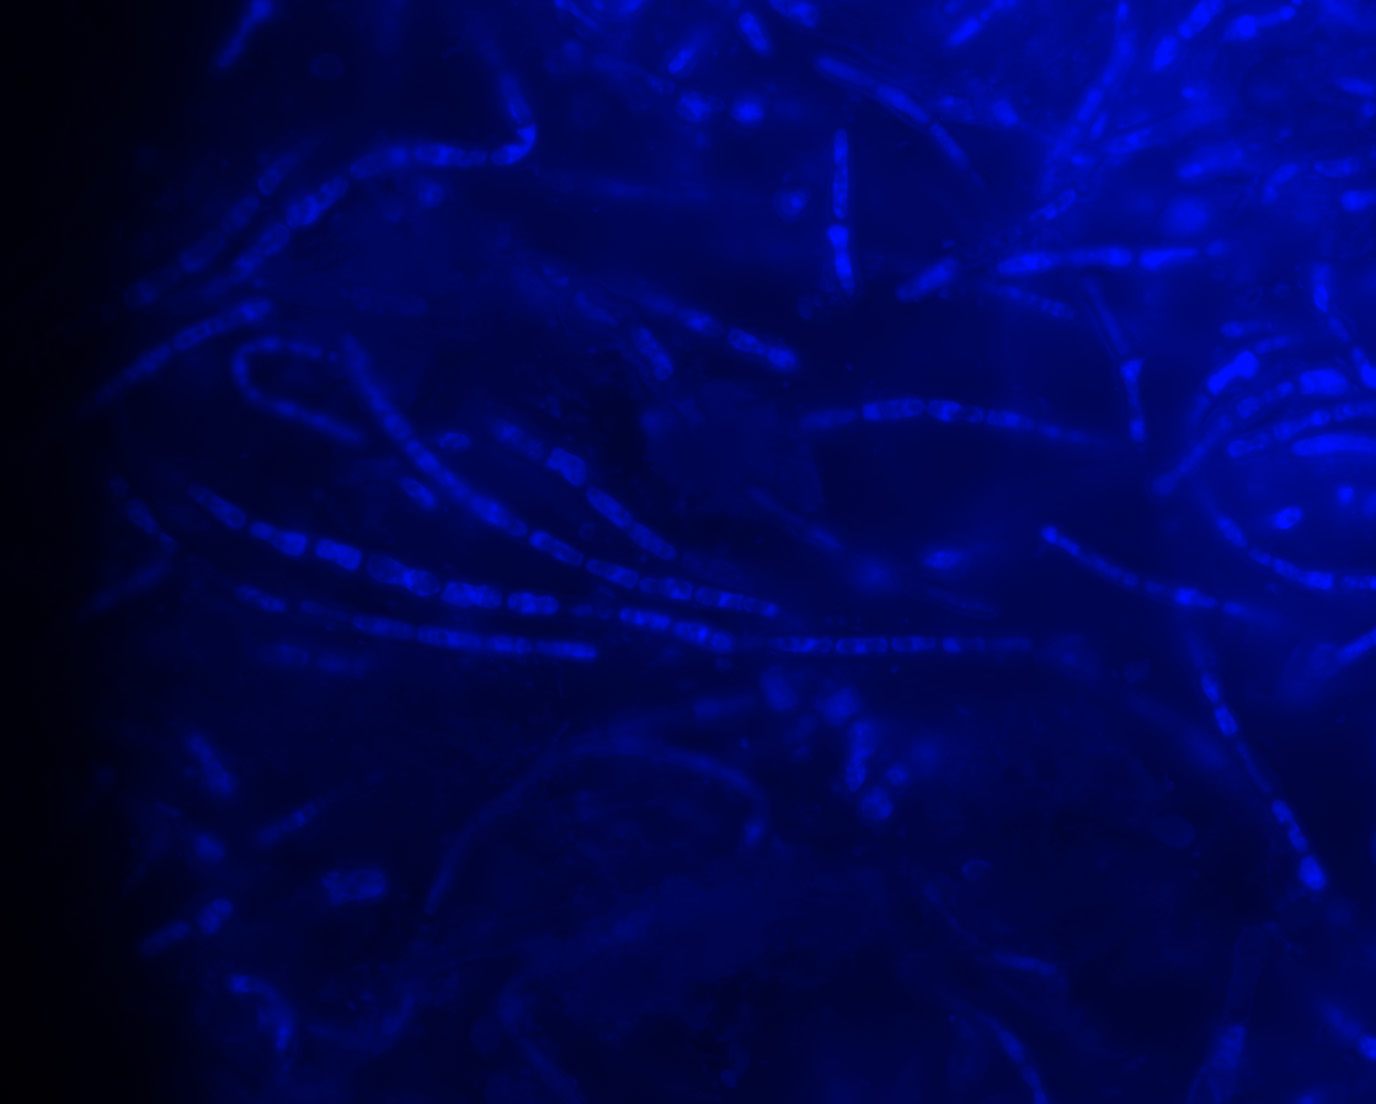 A microscope slide shows filaments of fungi glowing in an otherwise black image.